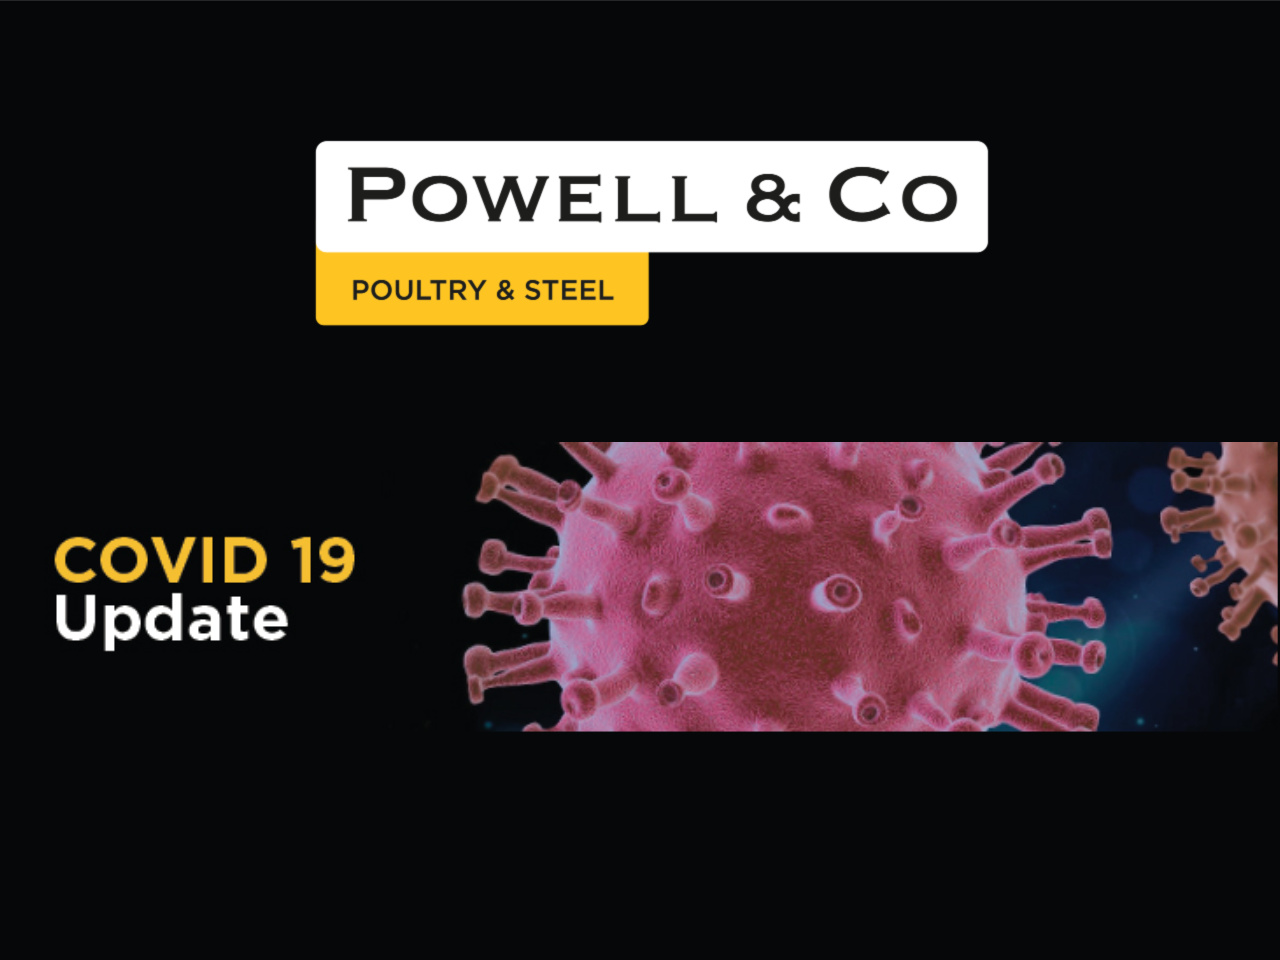 COVID 19 Update from Powell & Co